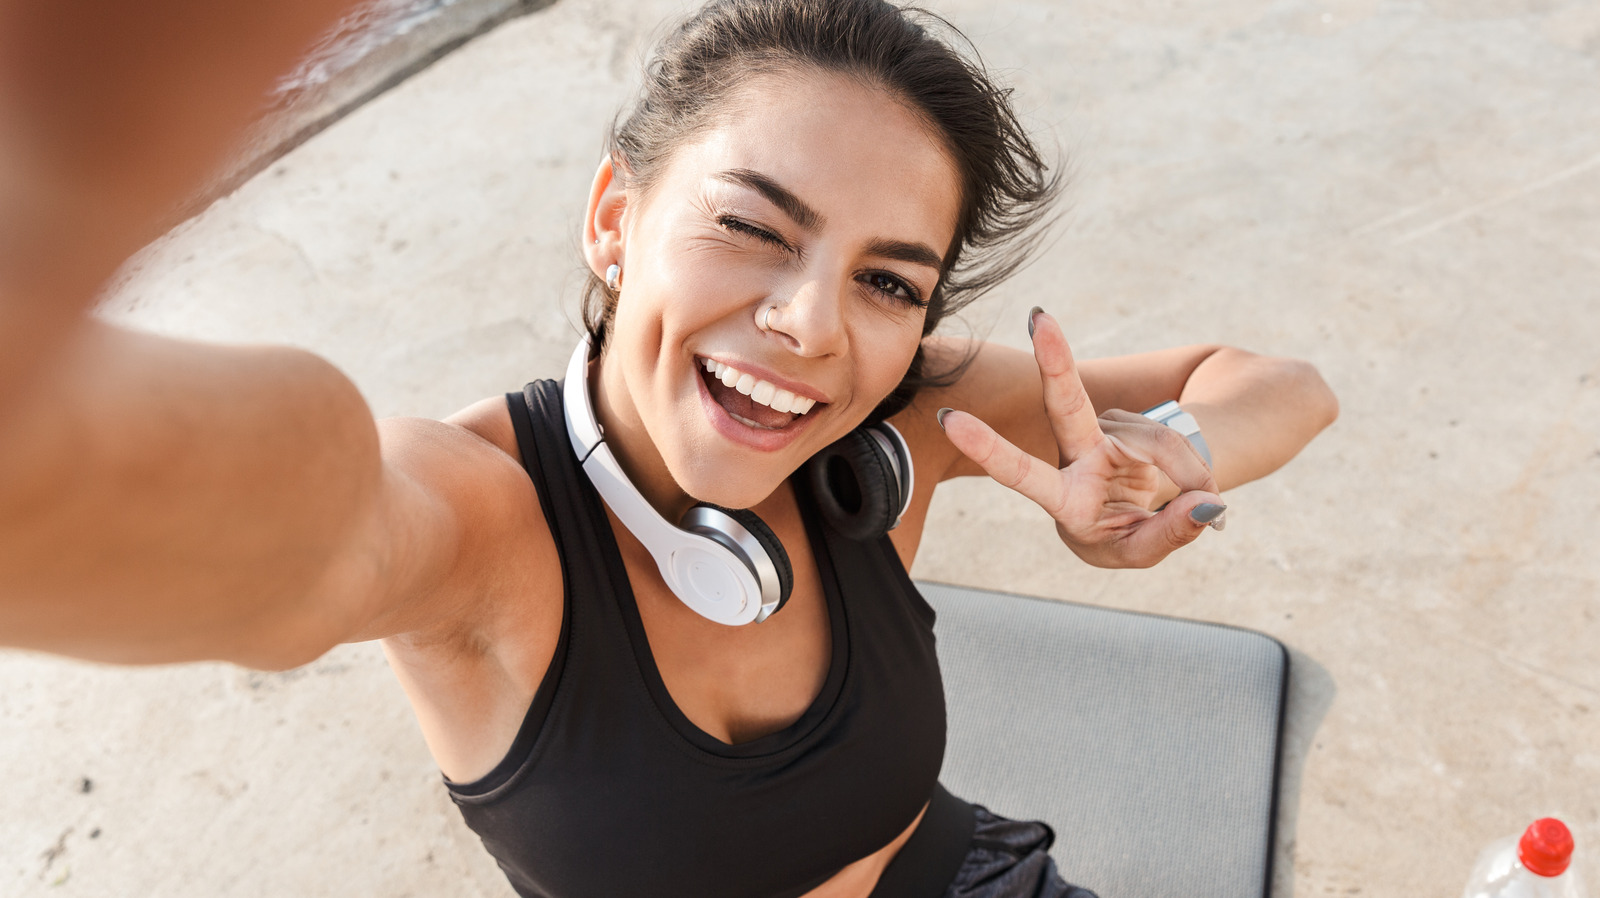 What happens to your body if you don't wear a sport bra when exercising?